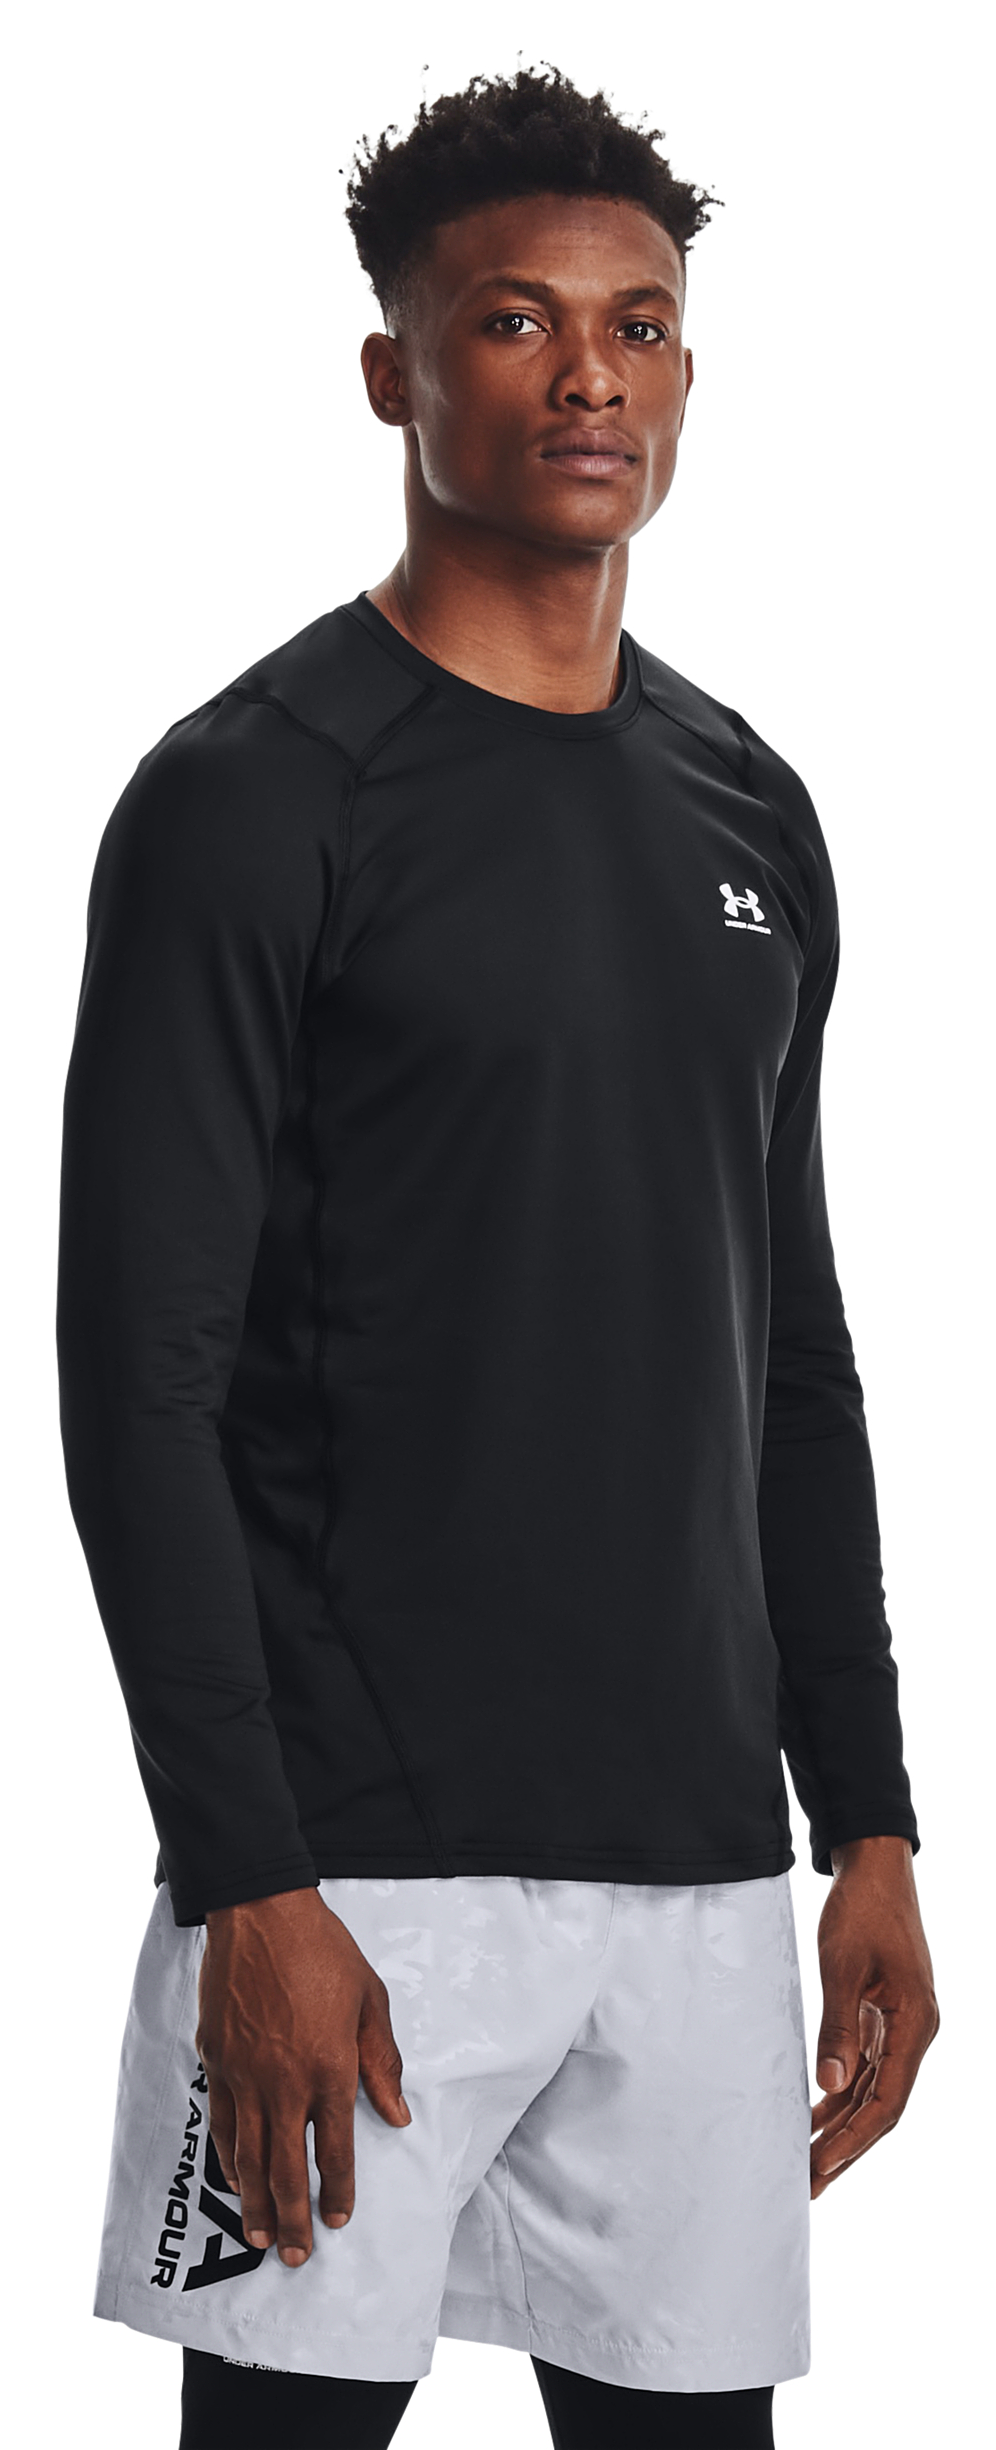 Under Armour ColdGear Fitted Long-Sleeve Crew for Men - Black/White - XLT